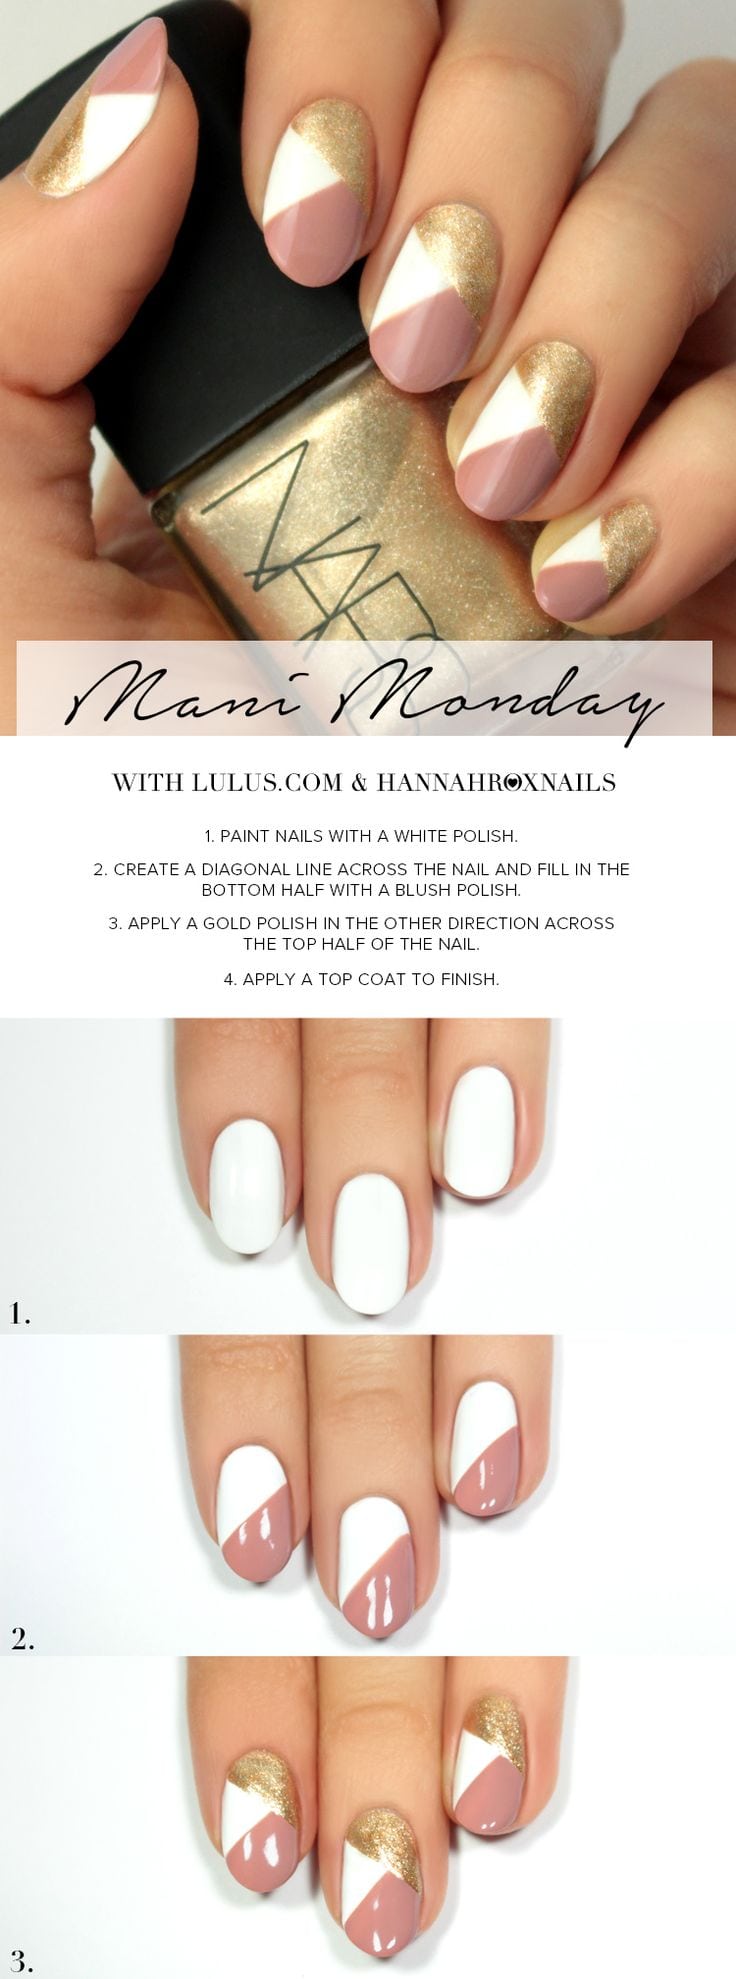 [ad_1]

Mani Monday: Pink and Gold Geo Nail Tutorial | Lulus.com Fashion Blog | Bloglovin’
Source by indyvsx
[ad_2]
			
			…